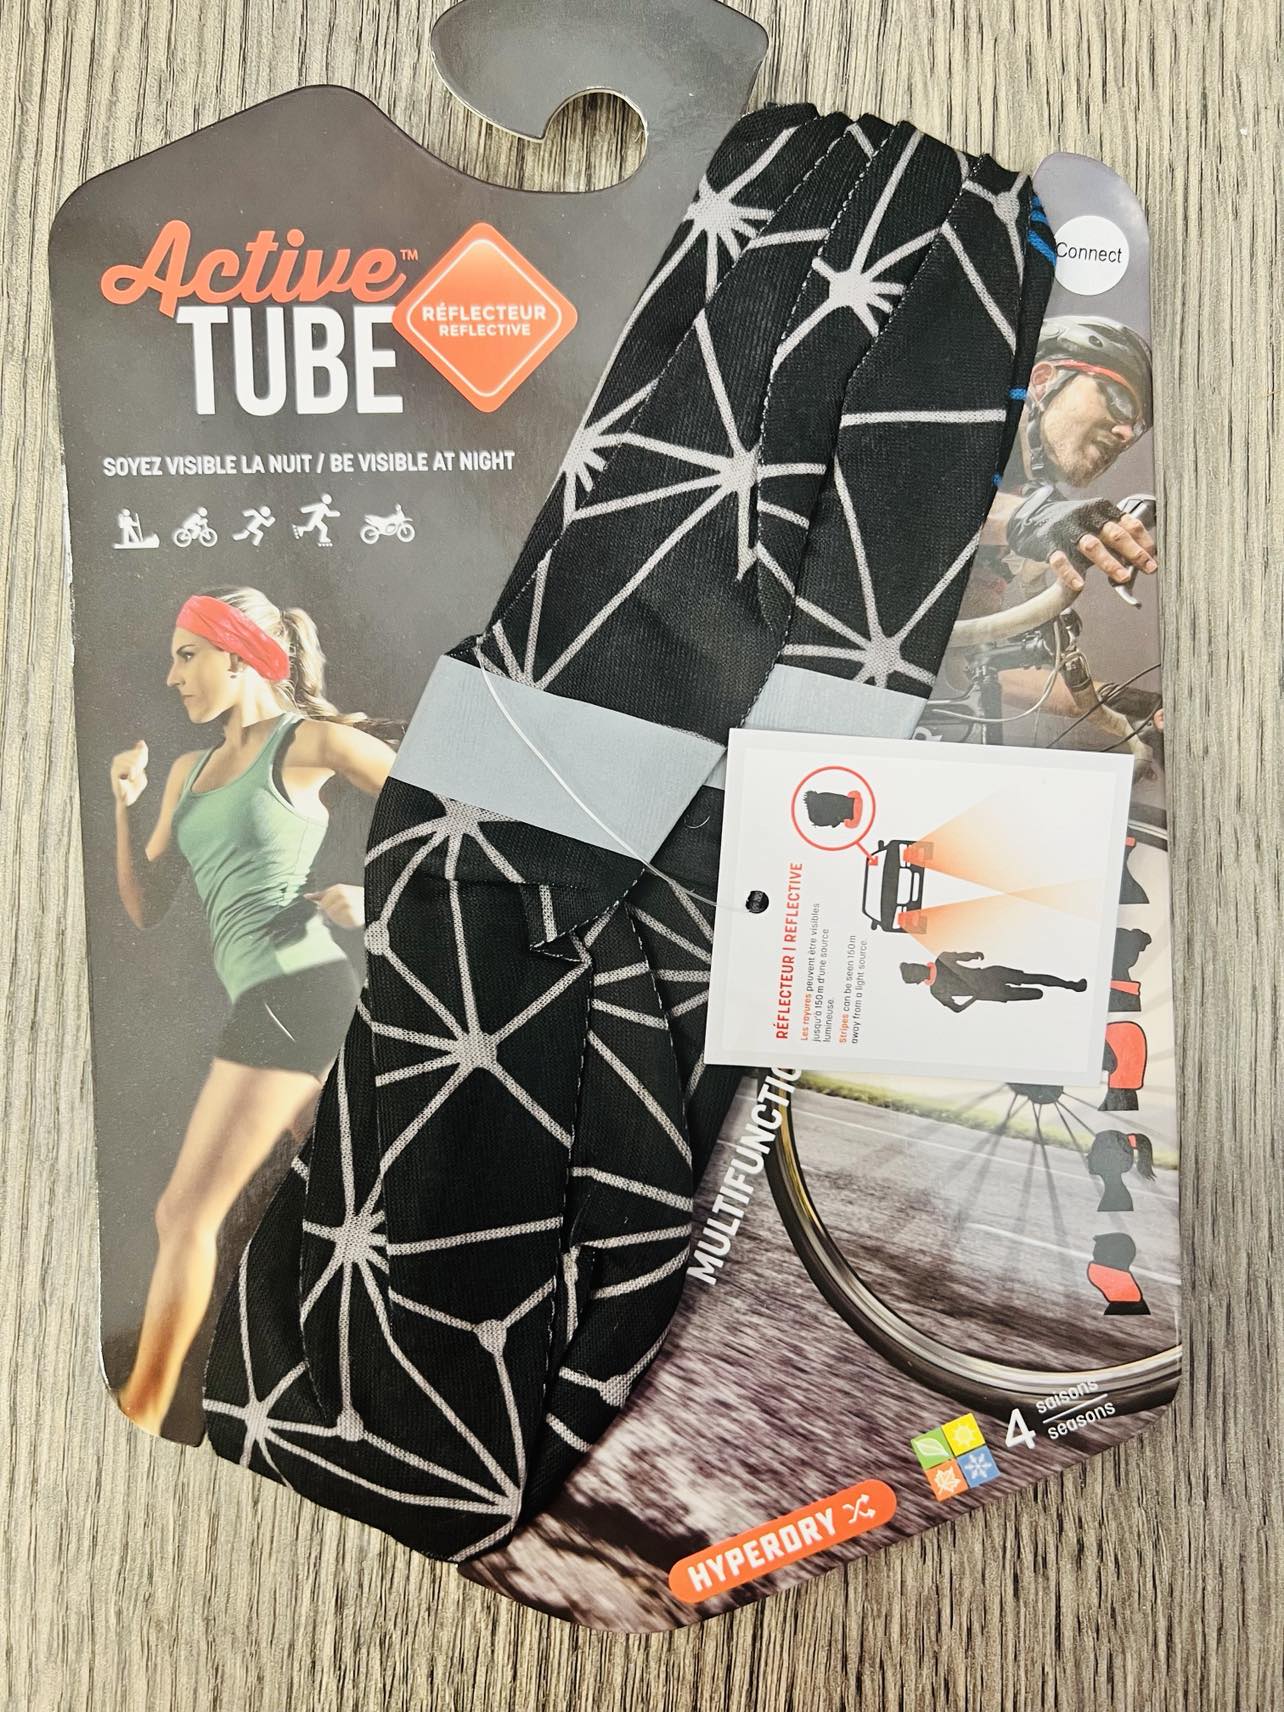 New Active Tube Reflective Head/Face Wear! Wear Many Ways! Connect Grey